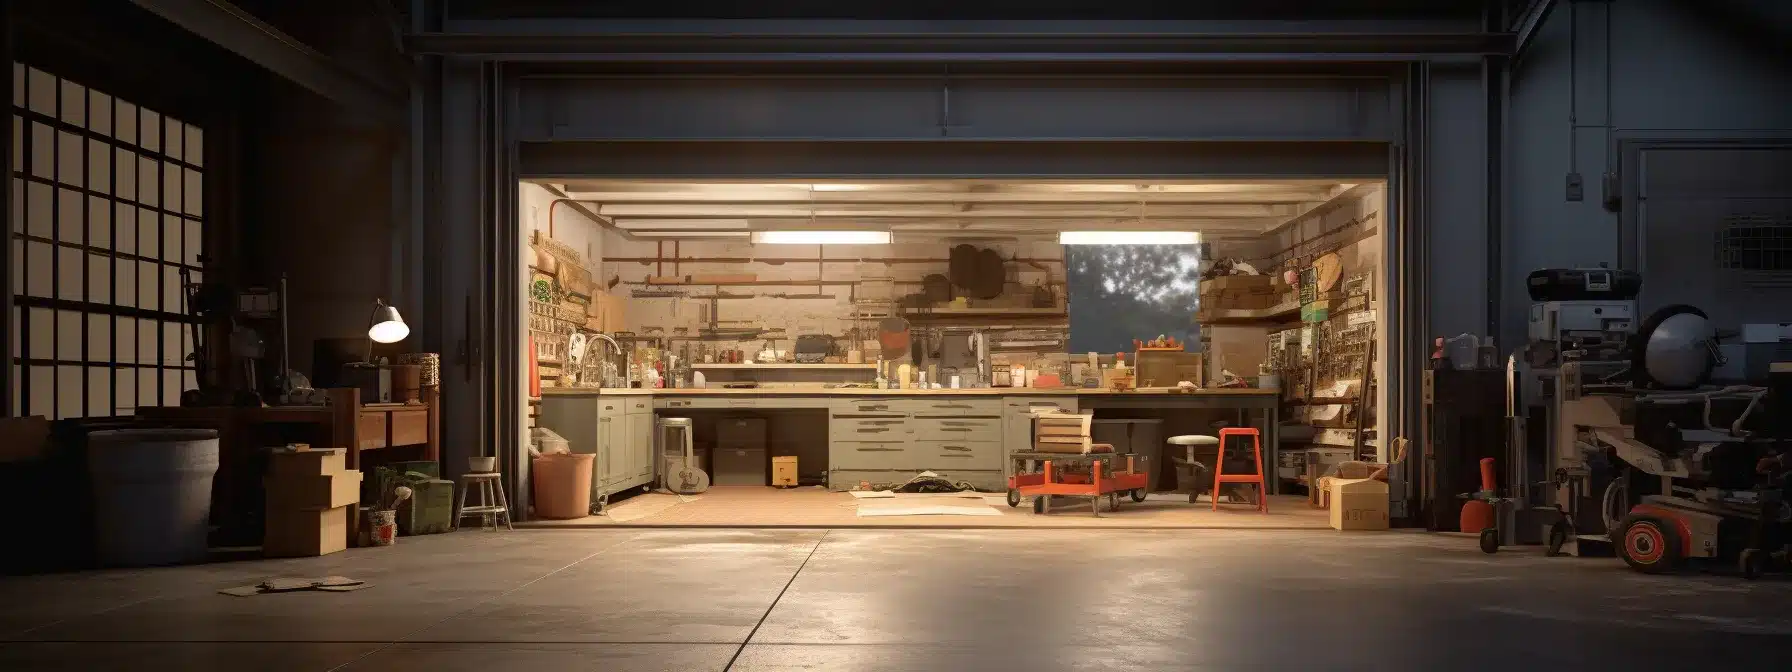 A Garage Transformed Into The Birthplace Of Apple'S Success Story.